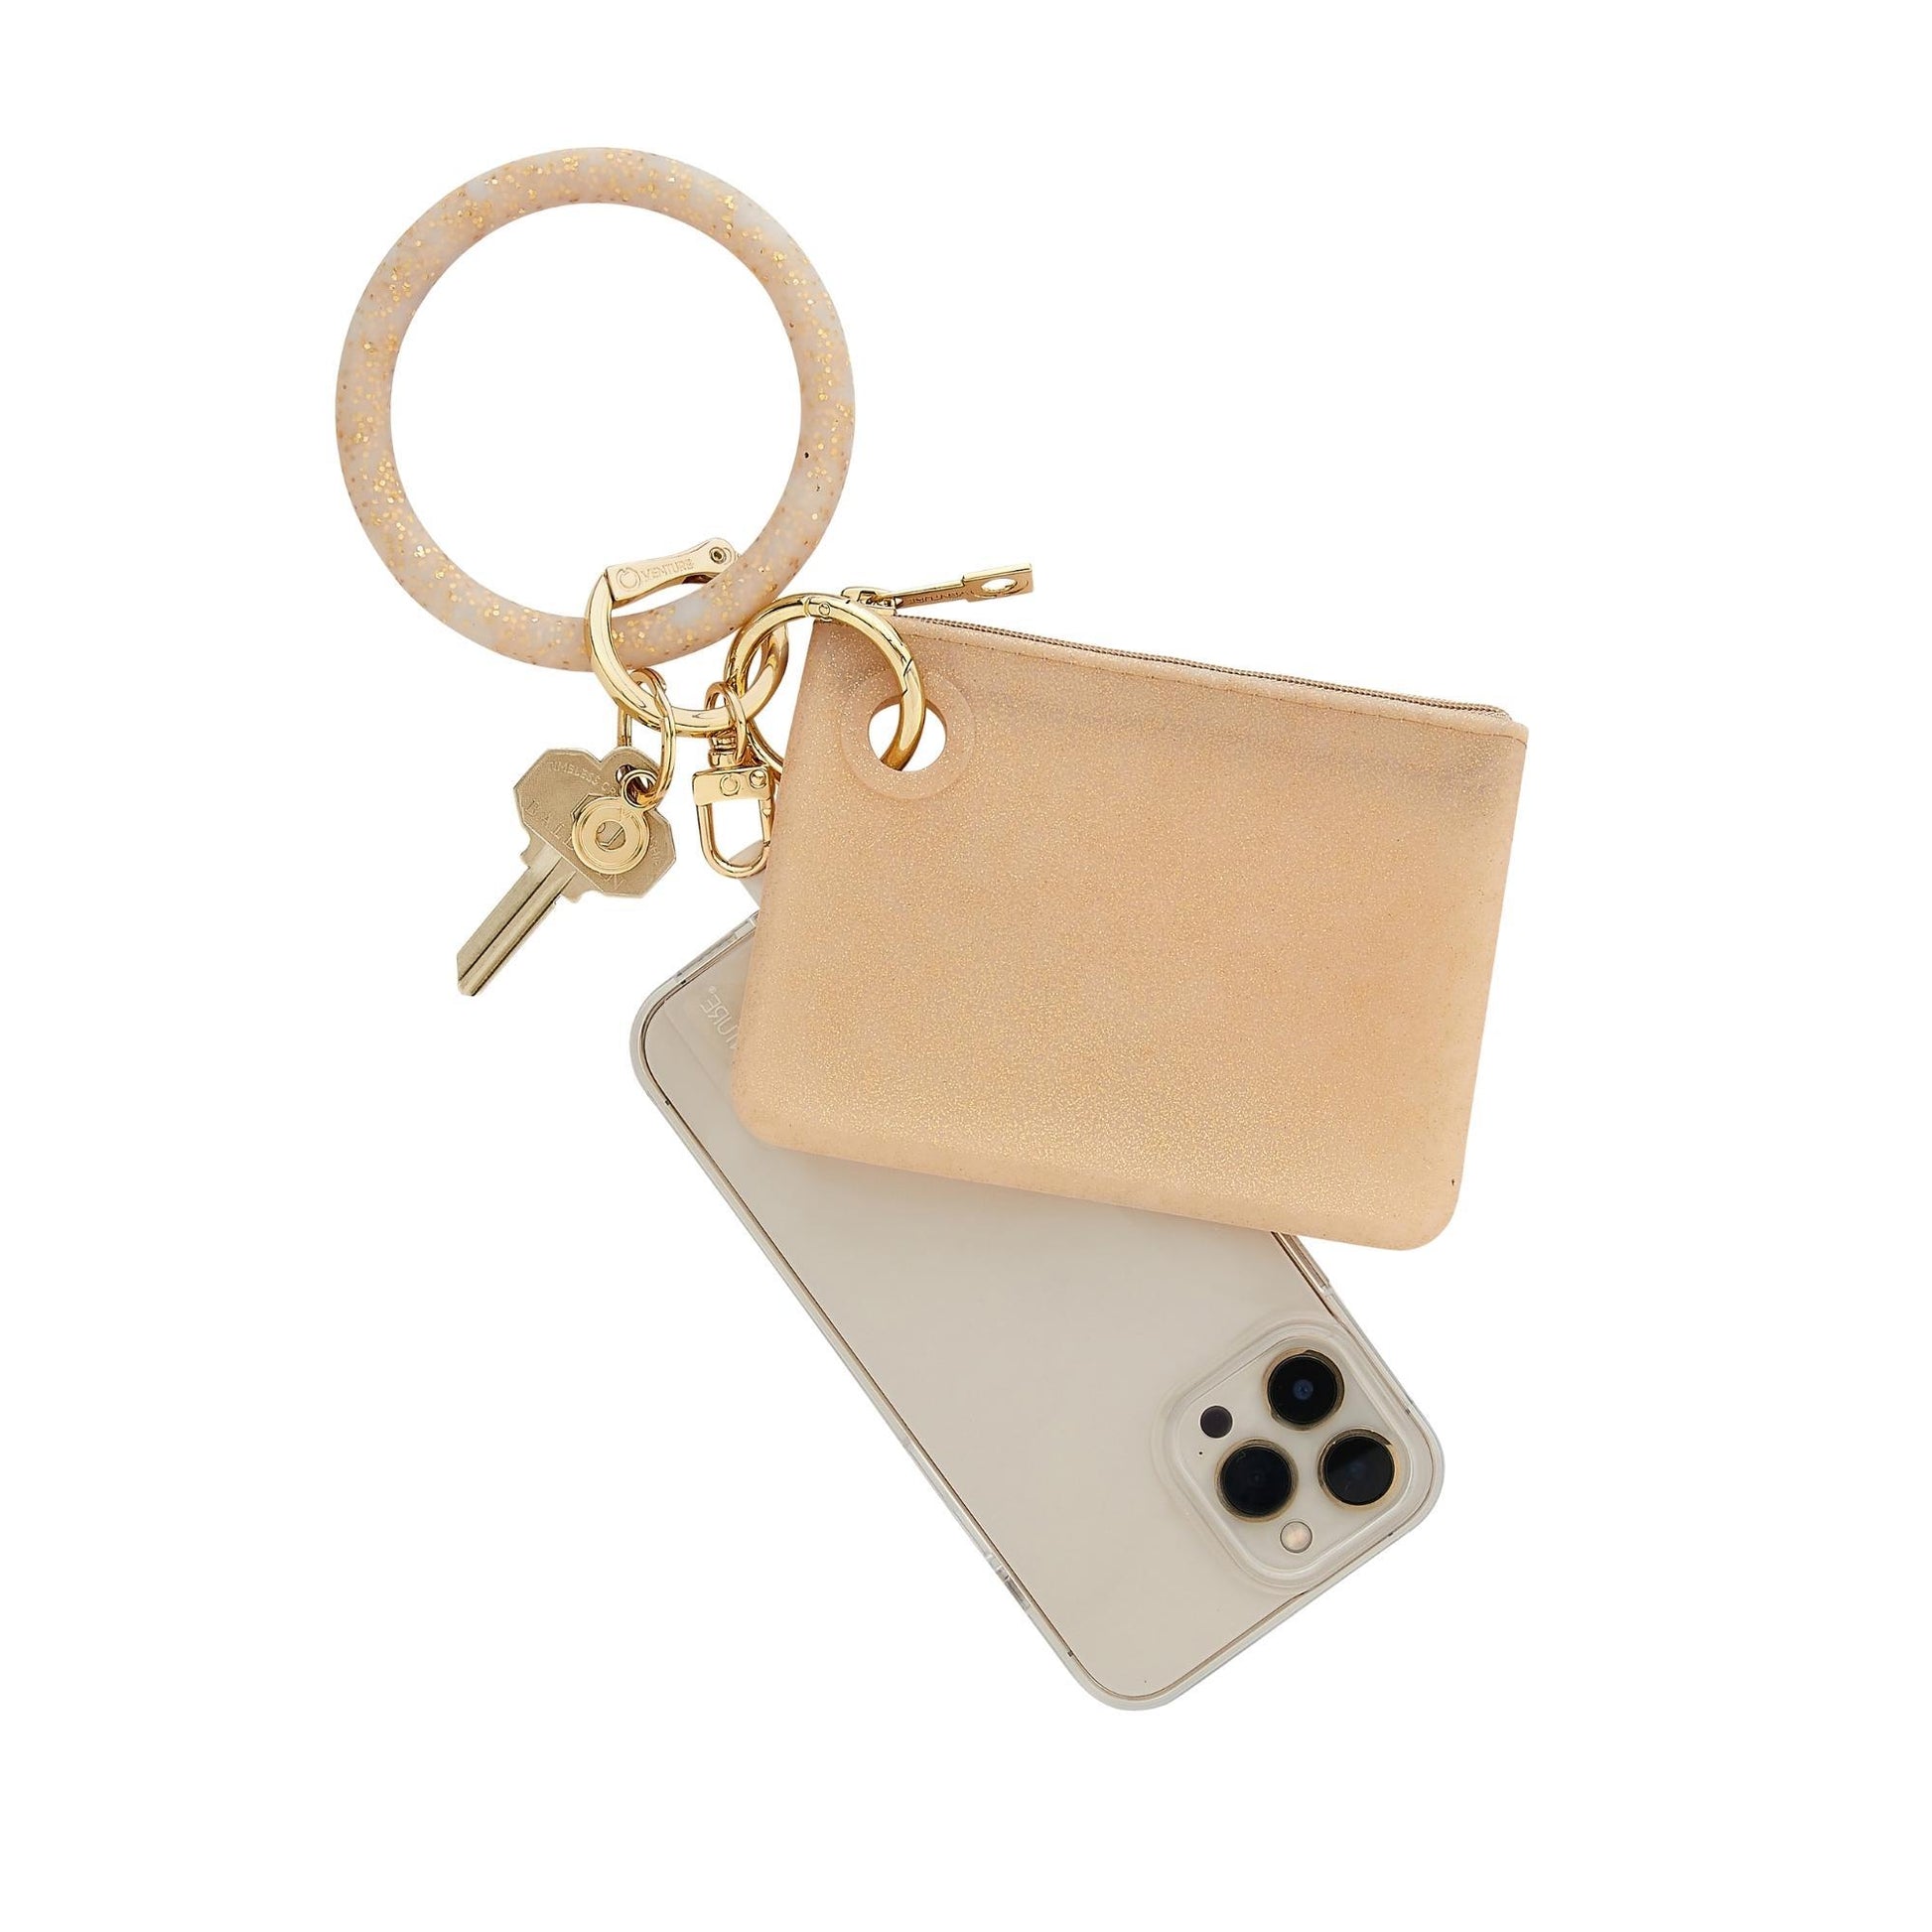 Oventure Silicone Big O Key Ring in Gold Confetti with Gold Confetti Mini Pouch and universal phone connector. Dual pouch and phone wristlet